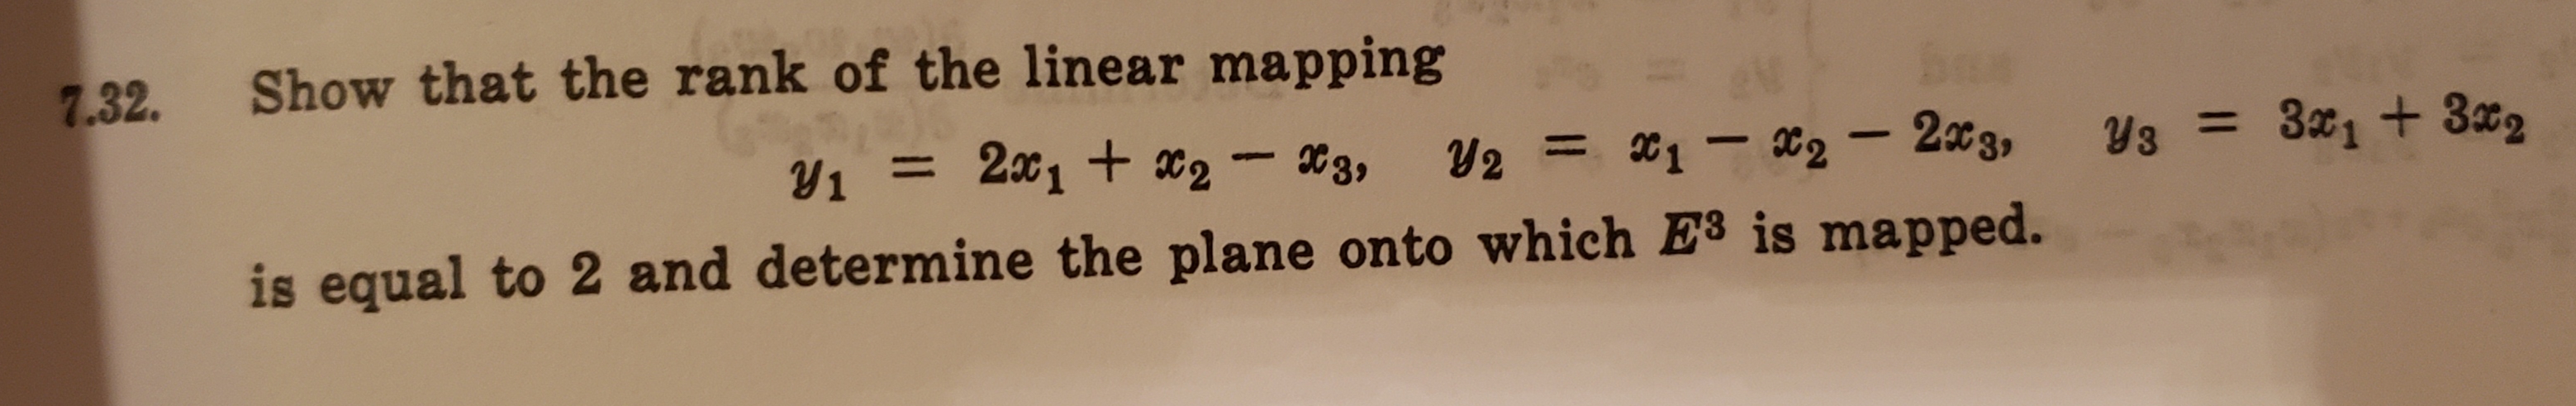 Show that the rank of the linear mapping
7.32.
Bar
Y3= 301 +302
y = 201 +20203,
31-02-203
1
V2
is equal to 2 and determine the plane onto which E3 is mapped.
